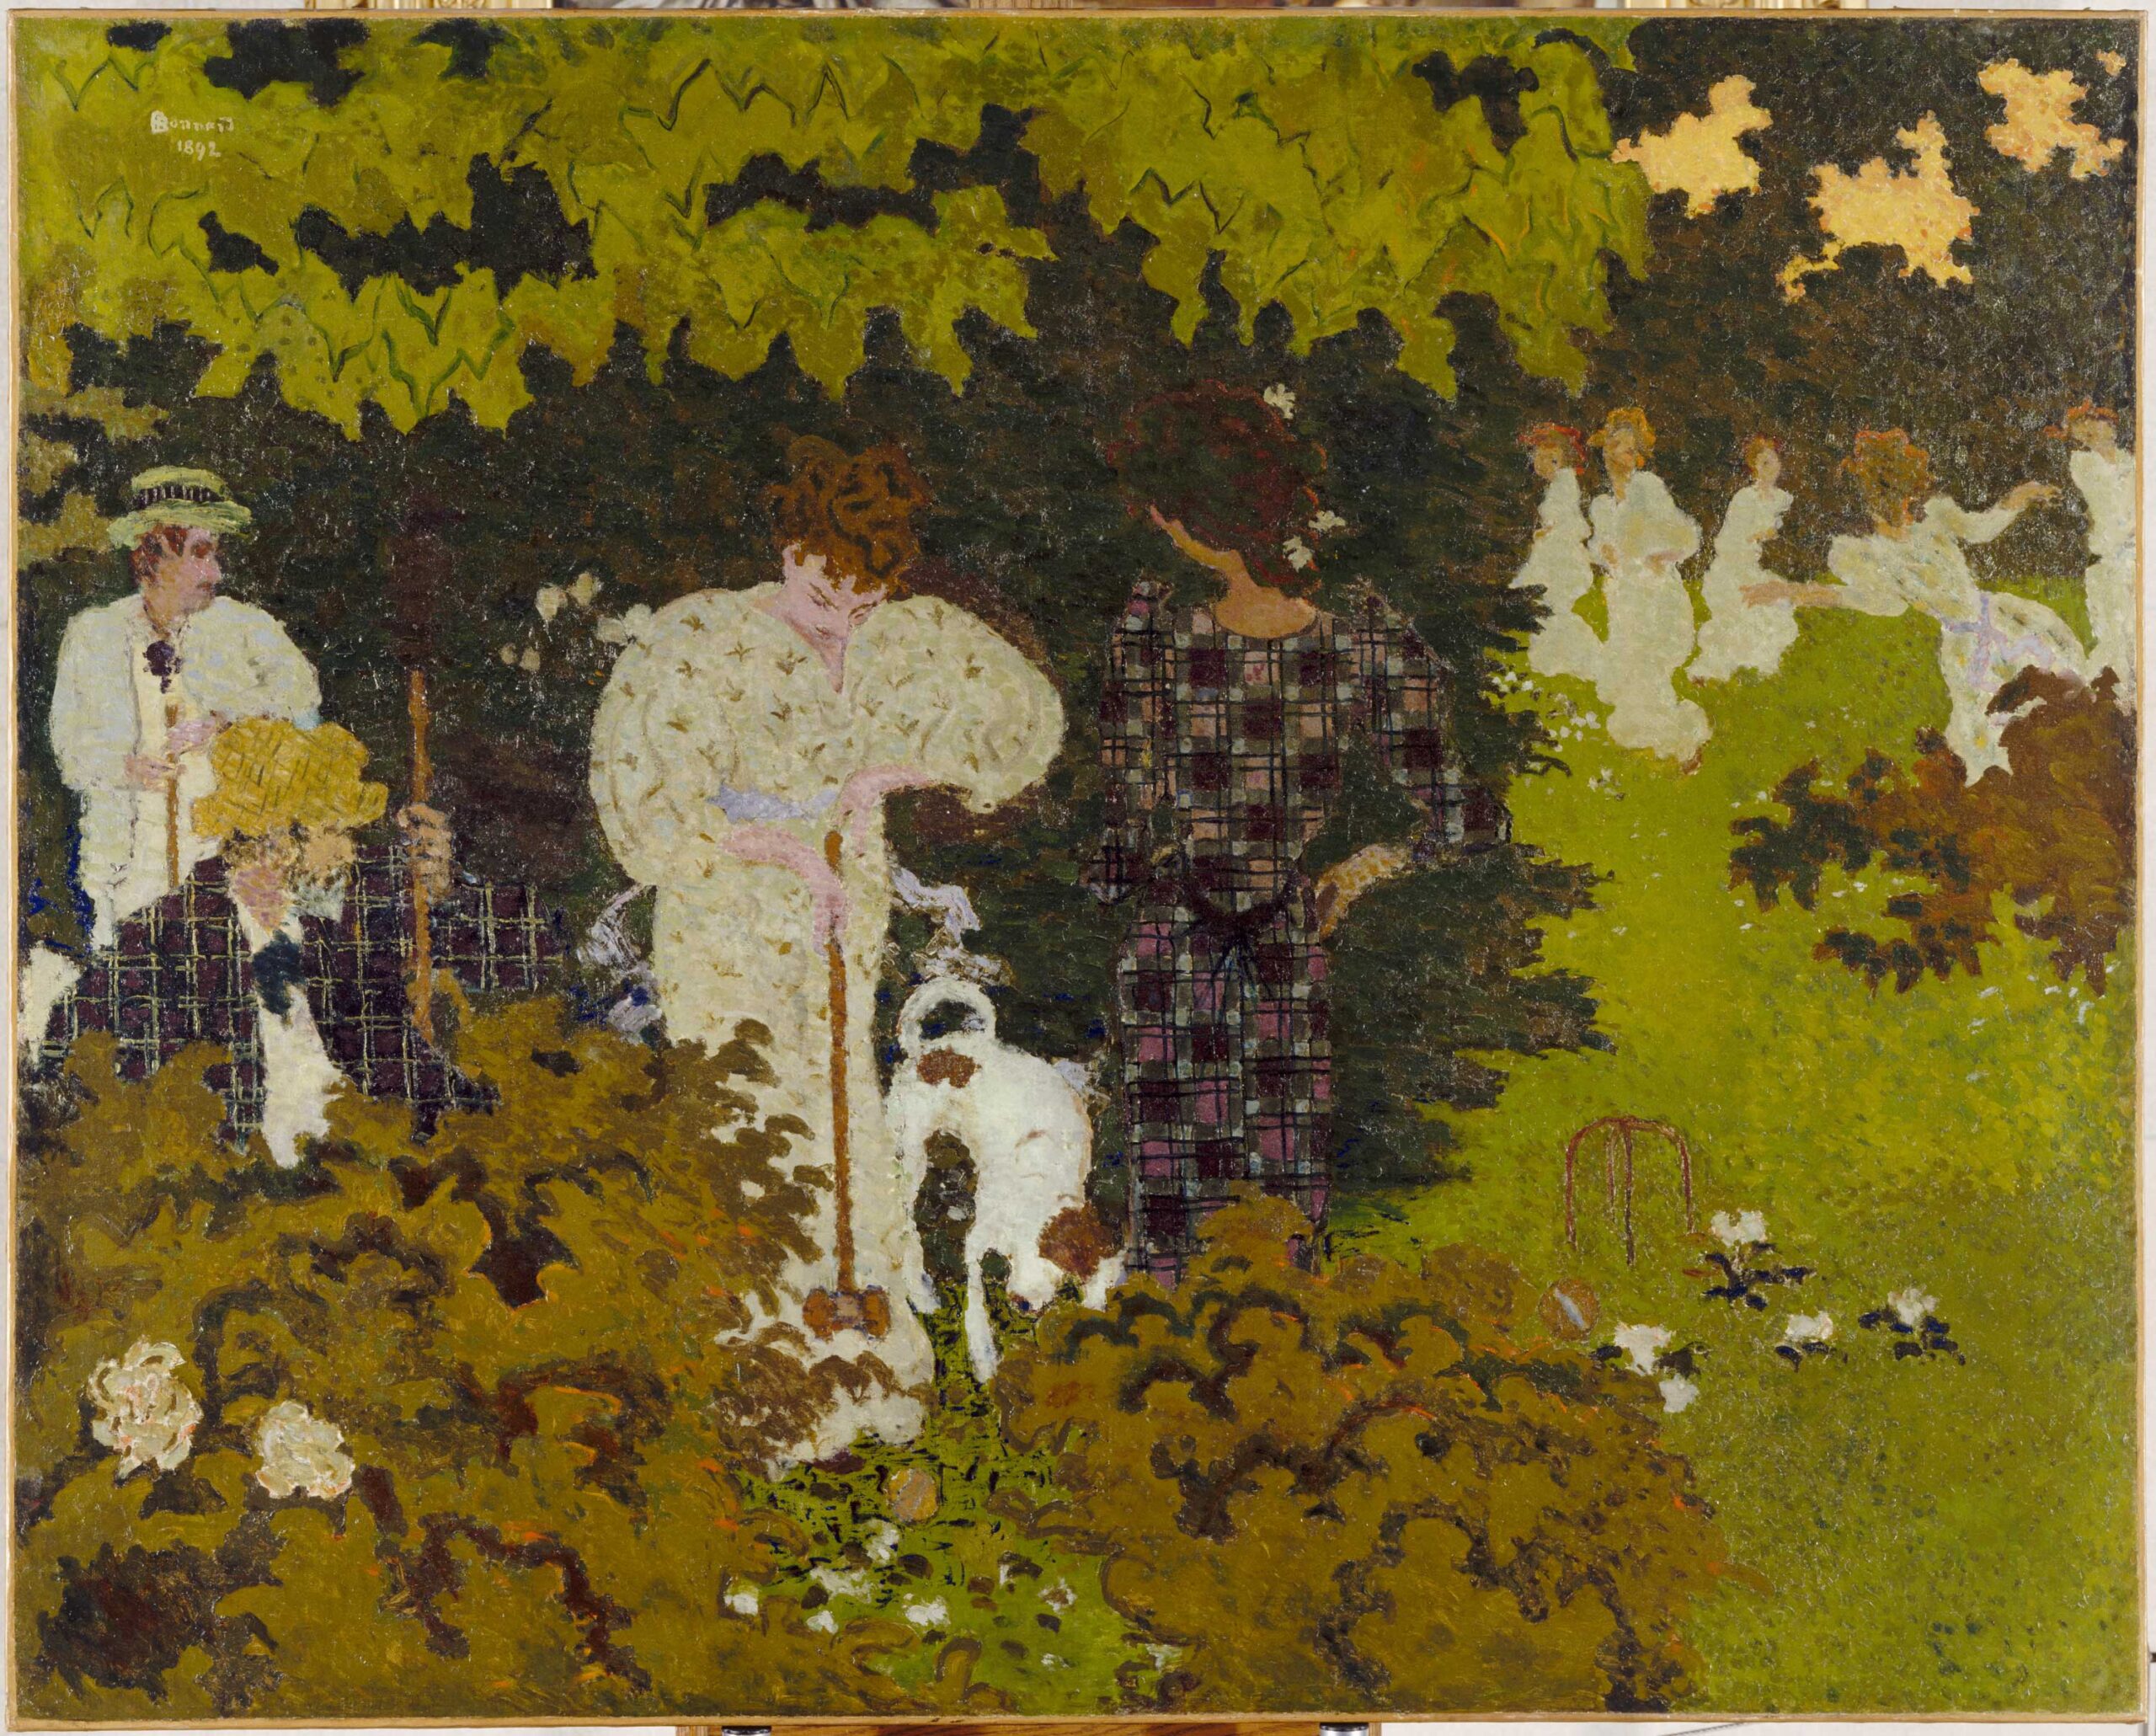 Pierre Bonnard, "Twilight (The Game of Croquet)," 1892, oil on canvas. Paris, Musée d'Orsay © 2023 Artists Rights Society (ARS), New York